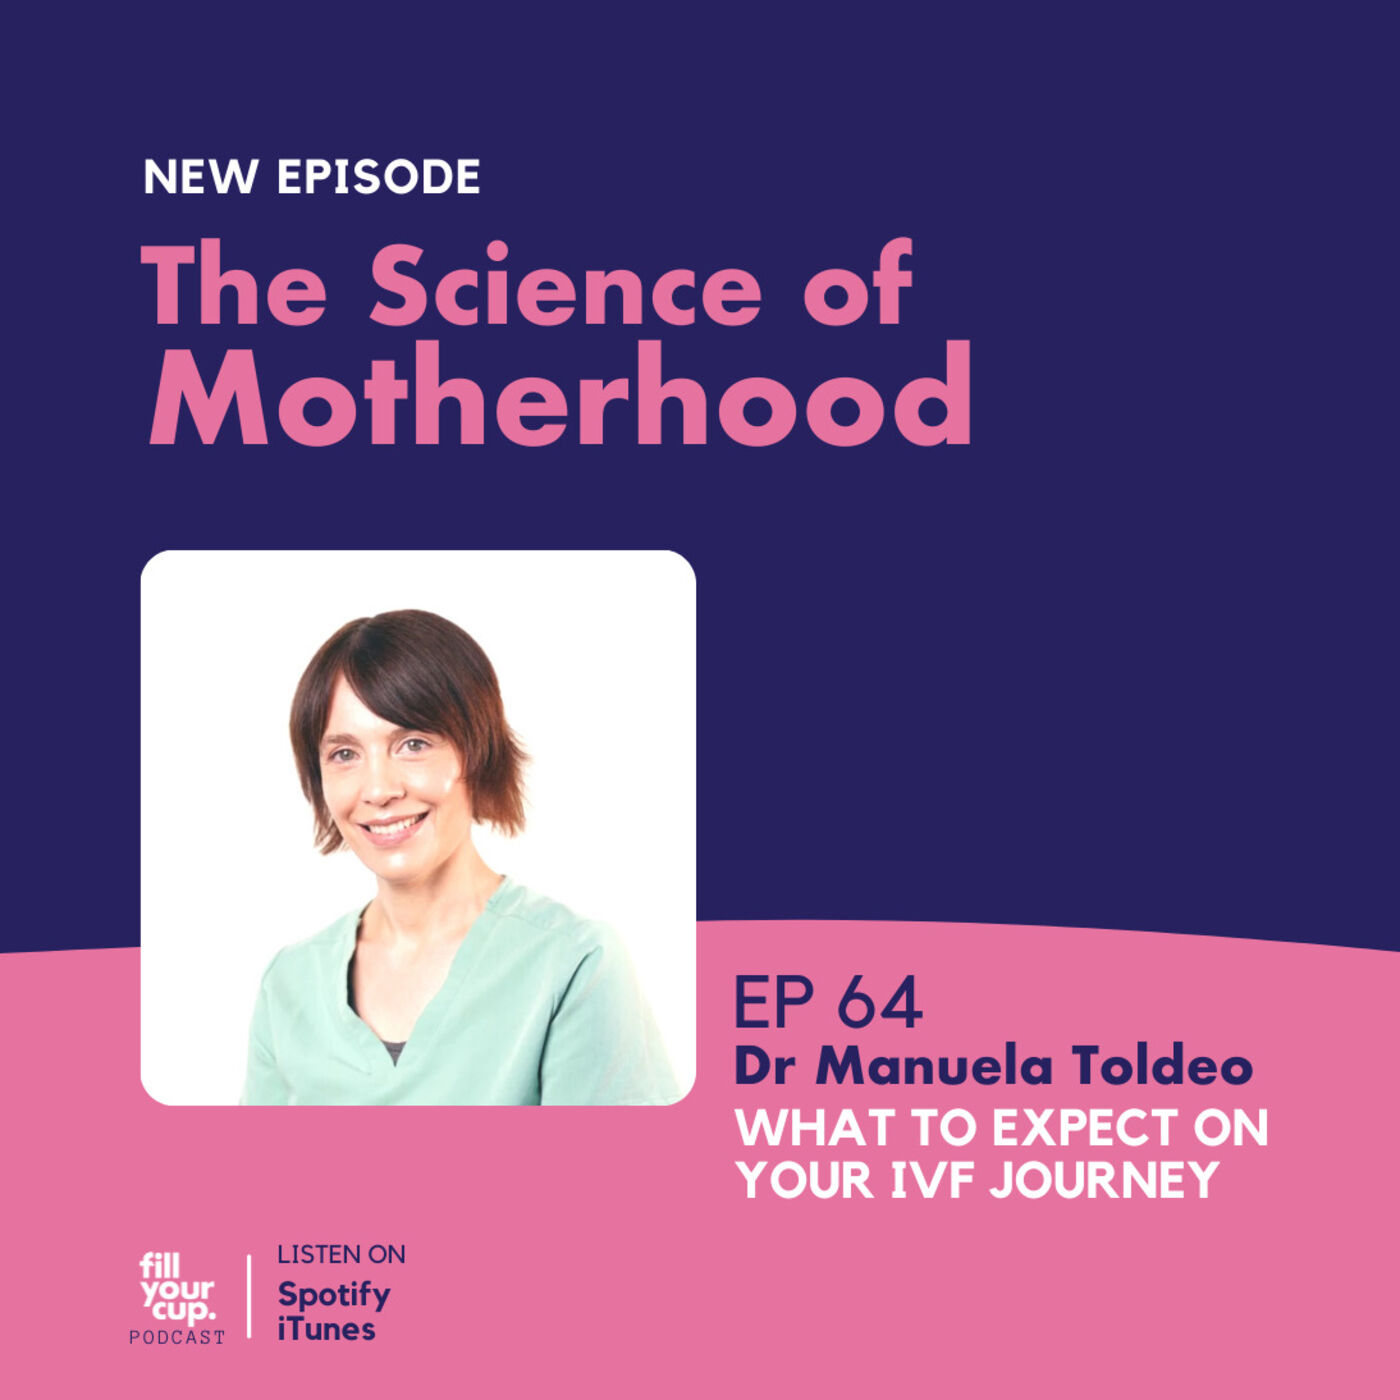 Ep 64. Dr Manuela Toledo - What to Expect on Your IVF Journey?